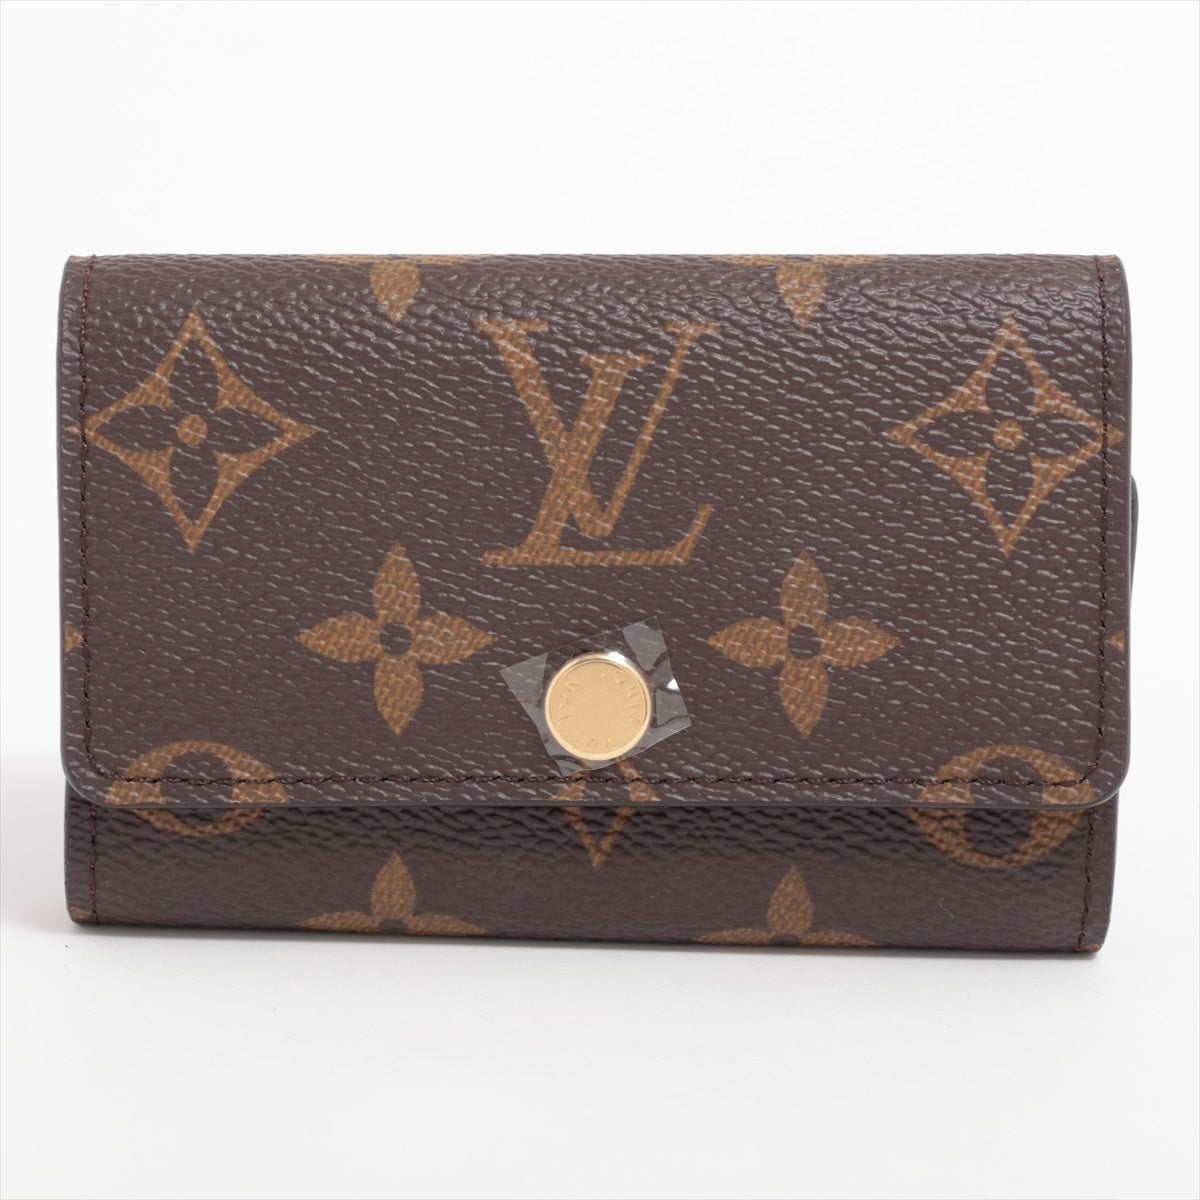 Louis Vuitton Monogram Multiclés 6 M60701 There was an RFID response